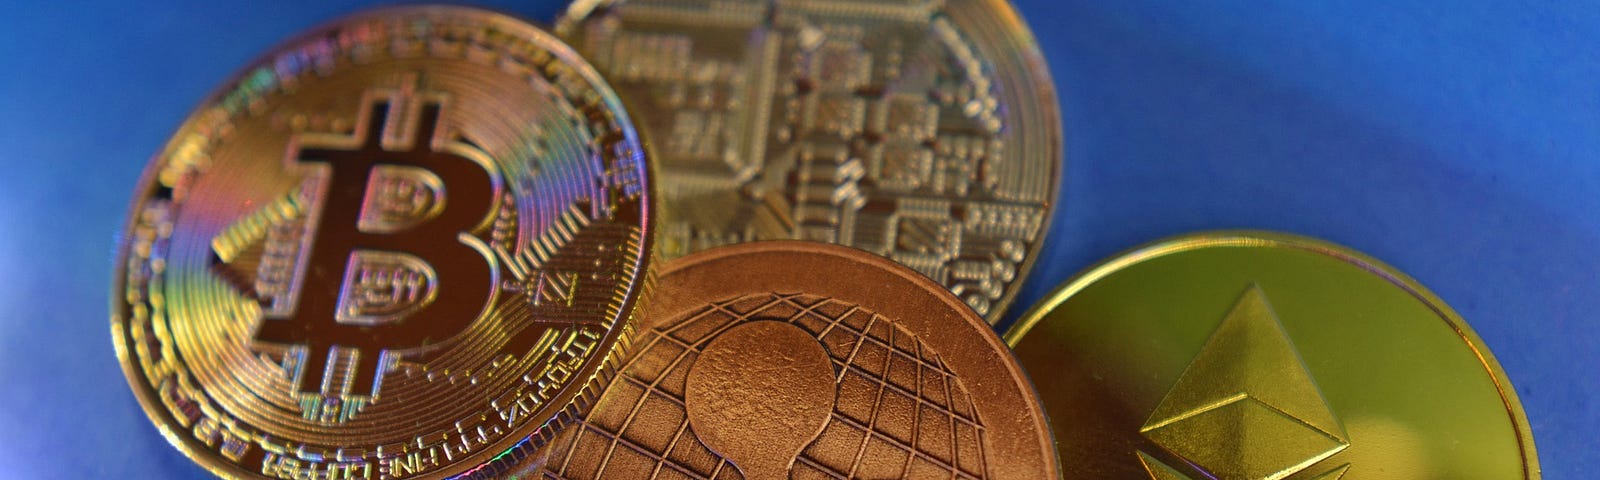 Multiple digital currency coins